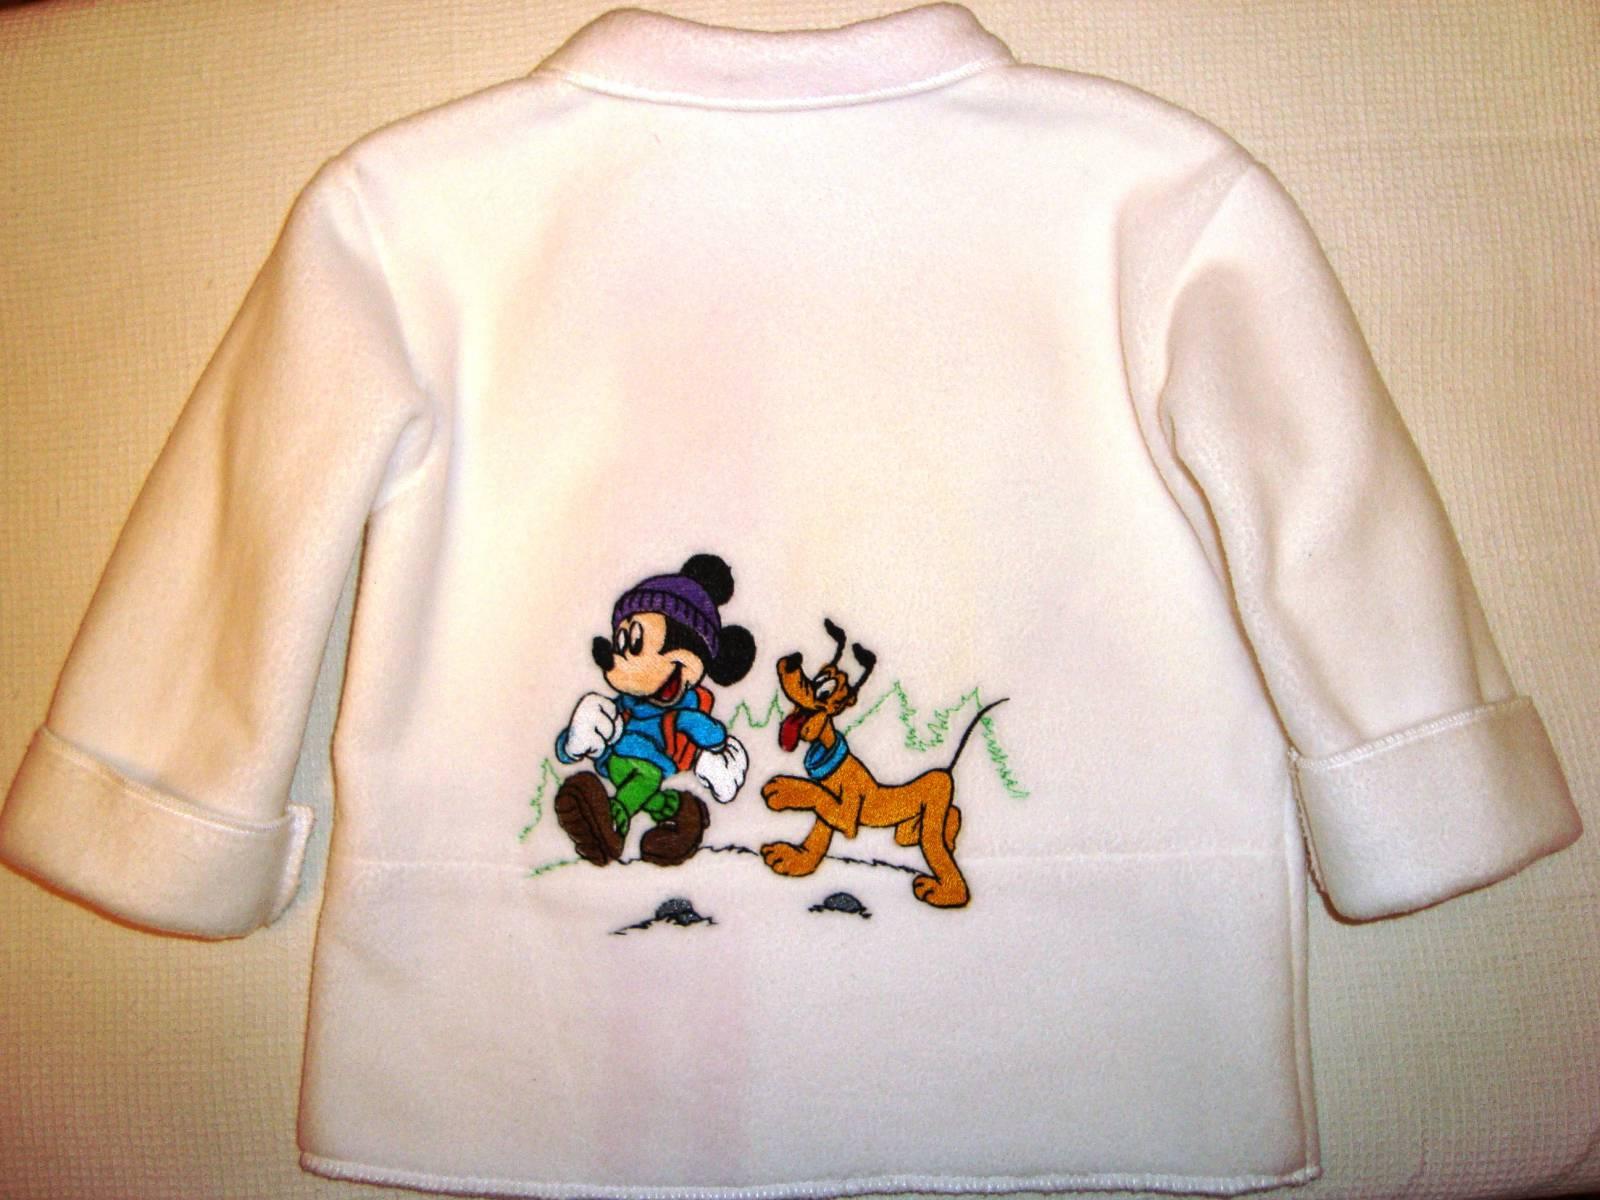 Baby jacket with Mickey Mouse and Pluto embroidery design